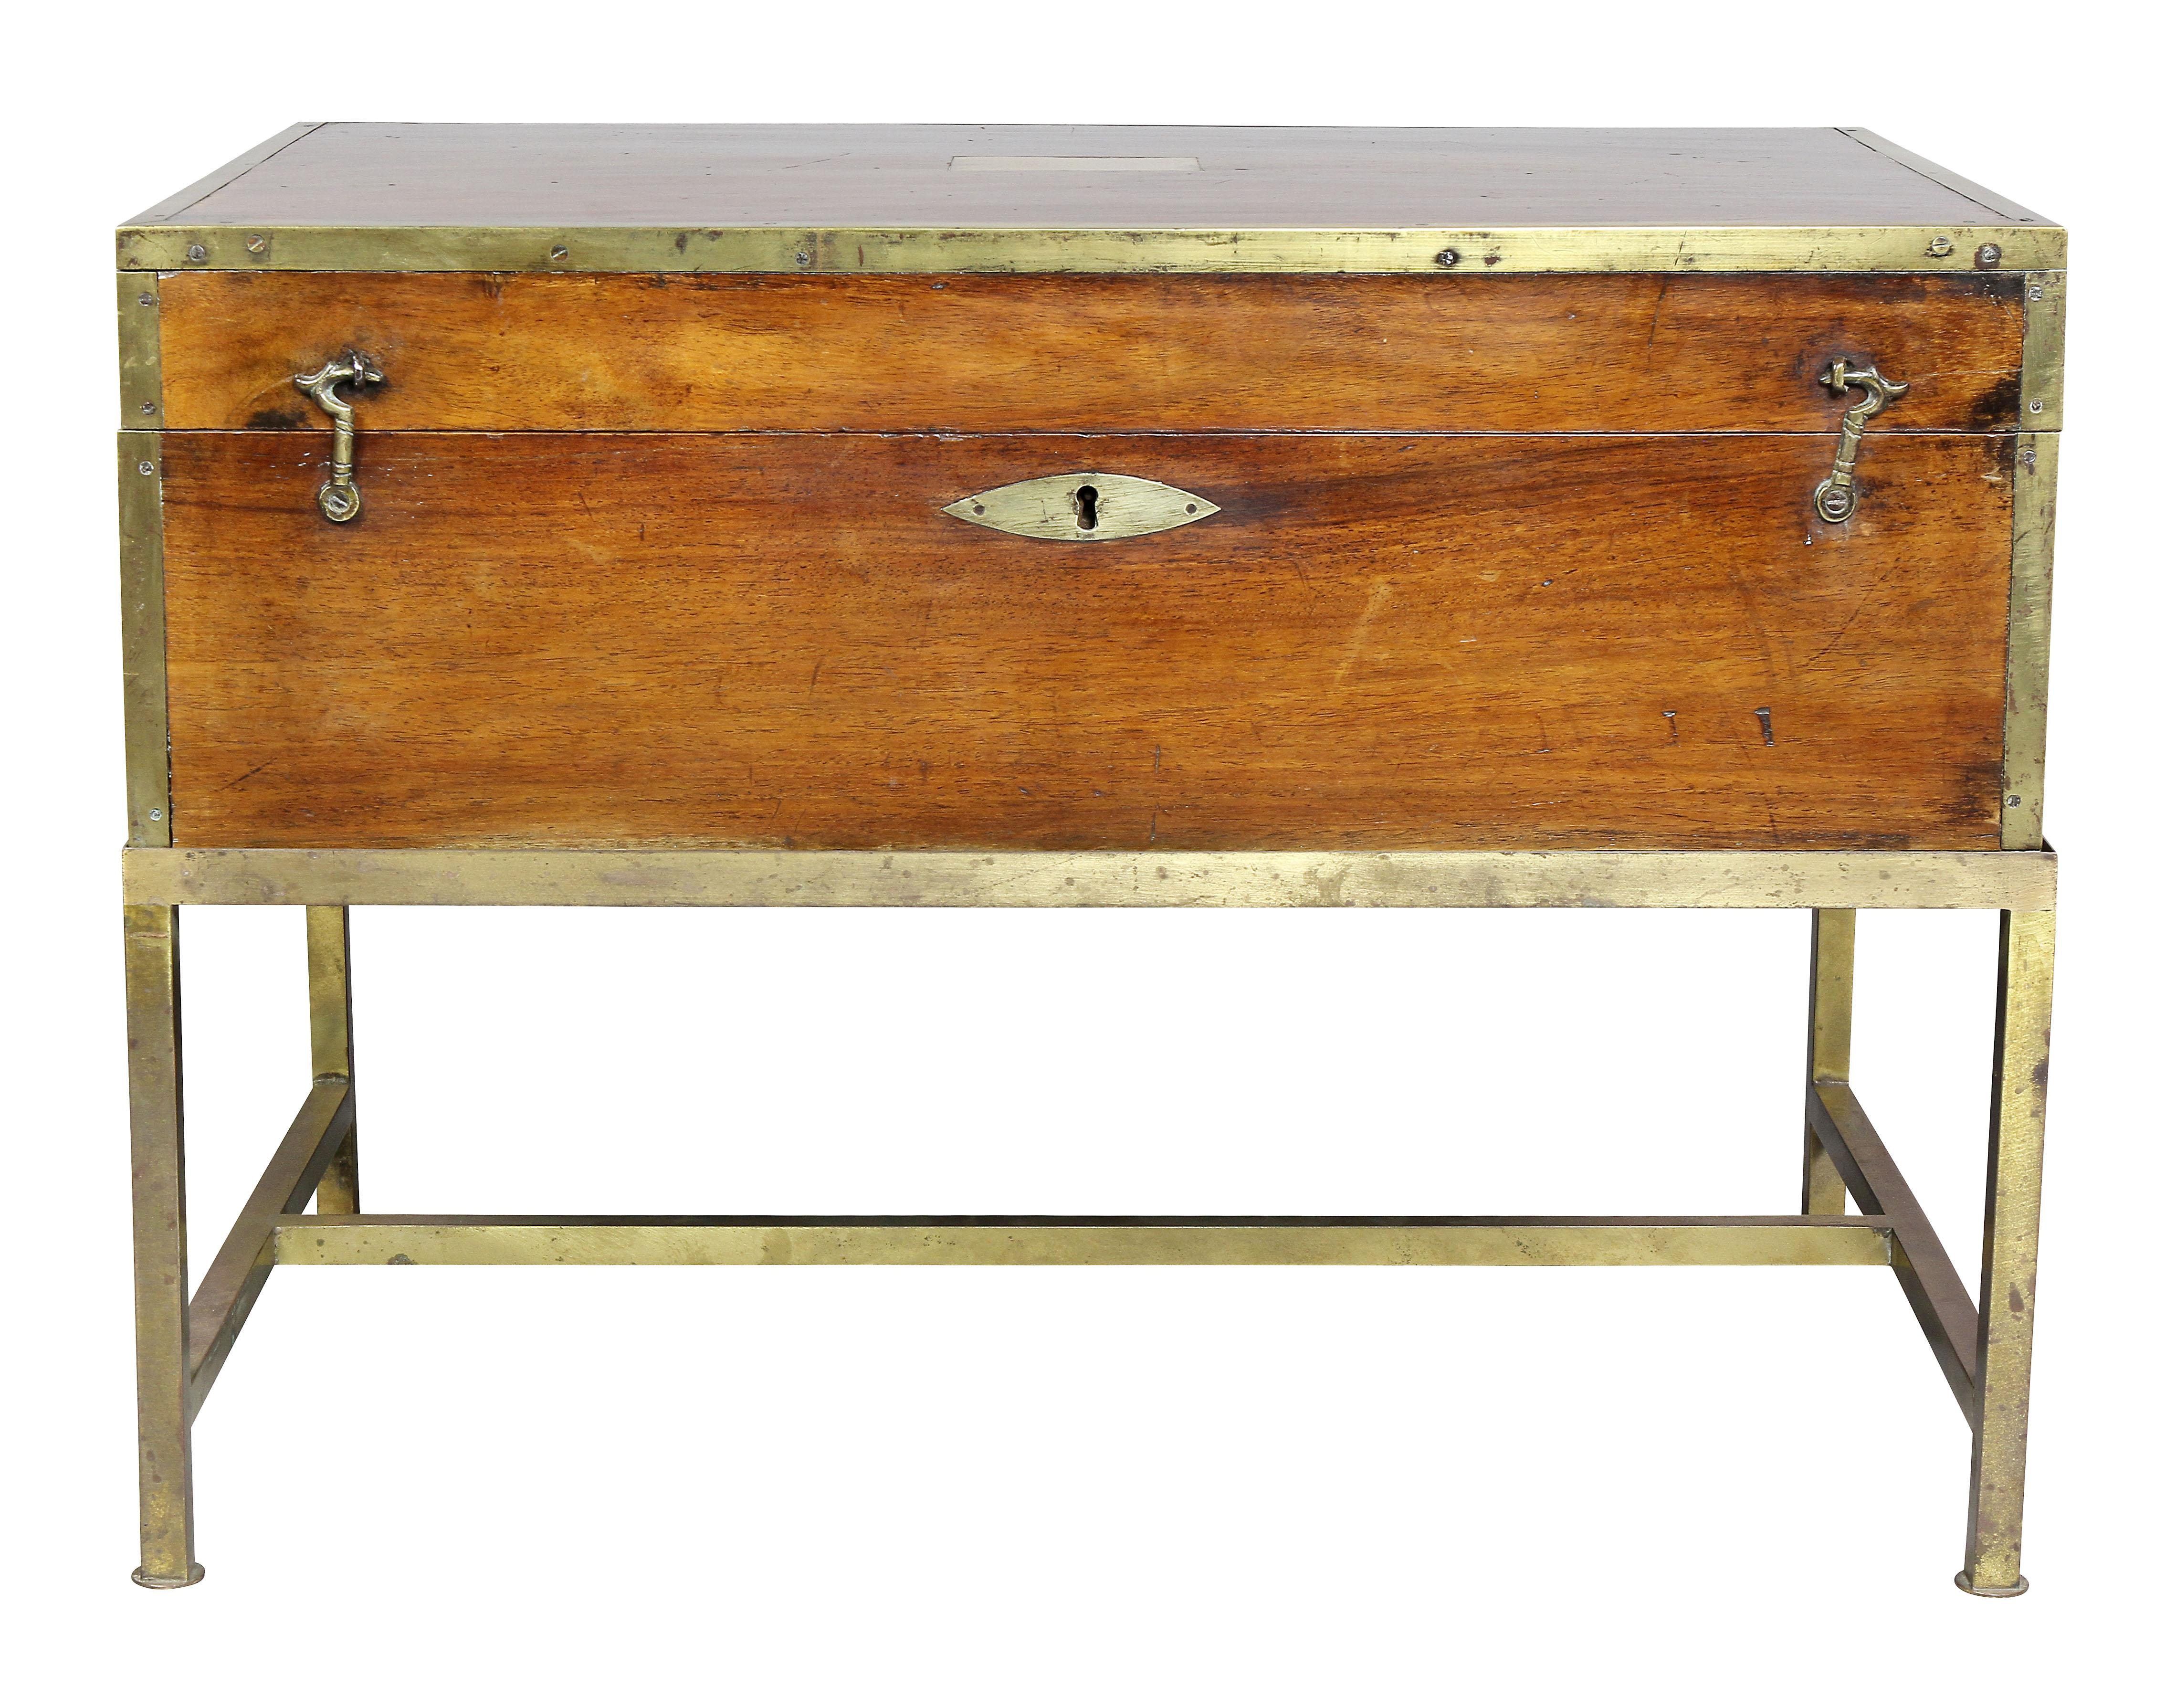 Rectangular hinged top with simple rectangular plaque and brass bound edge, conforming case section, later brass base.